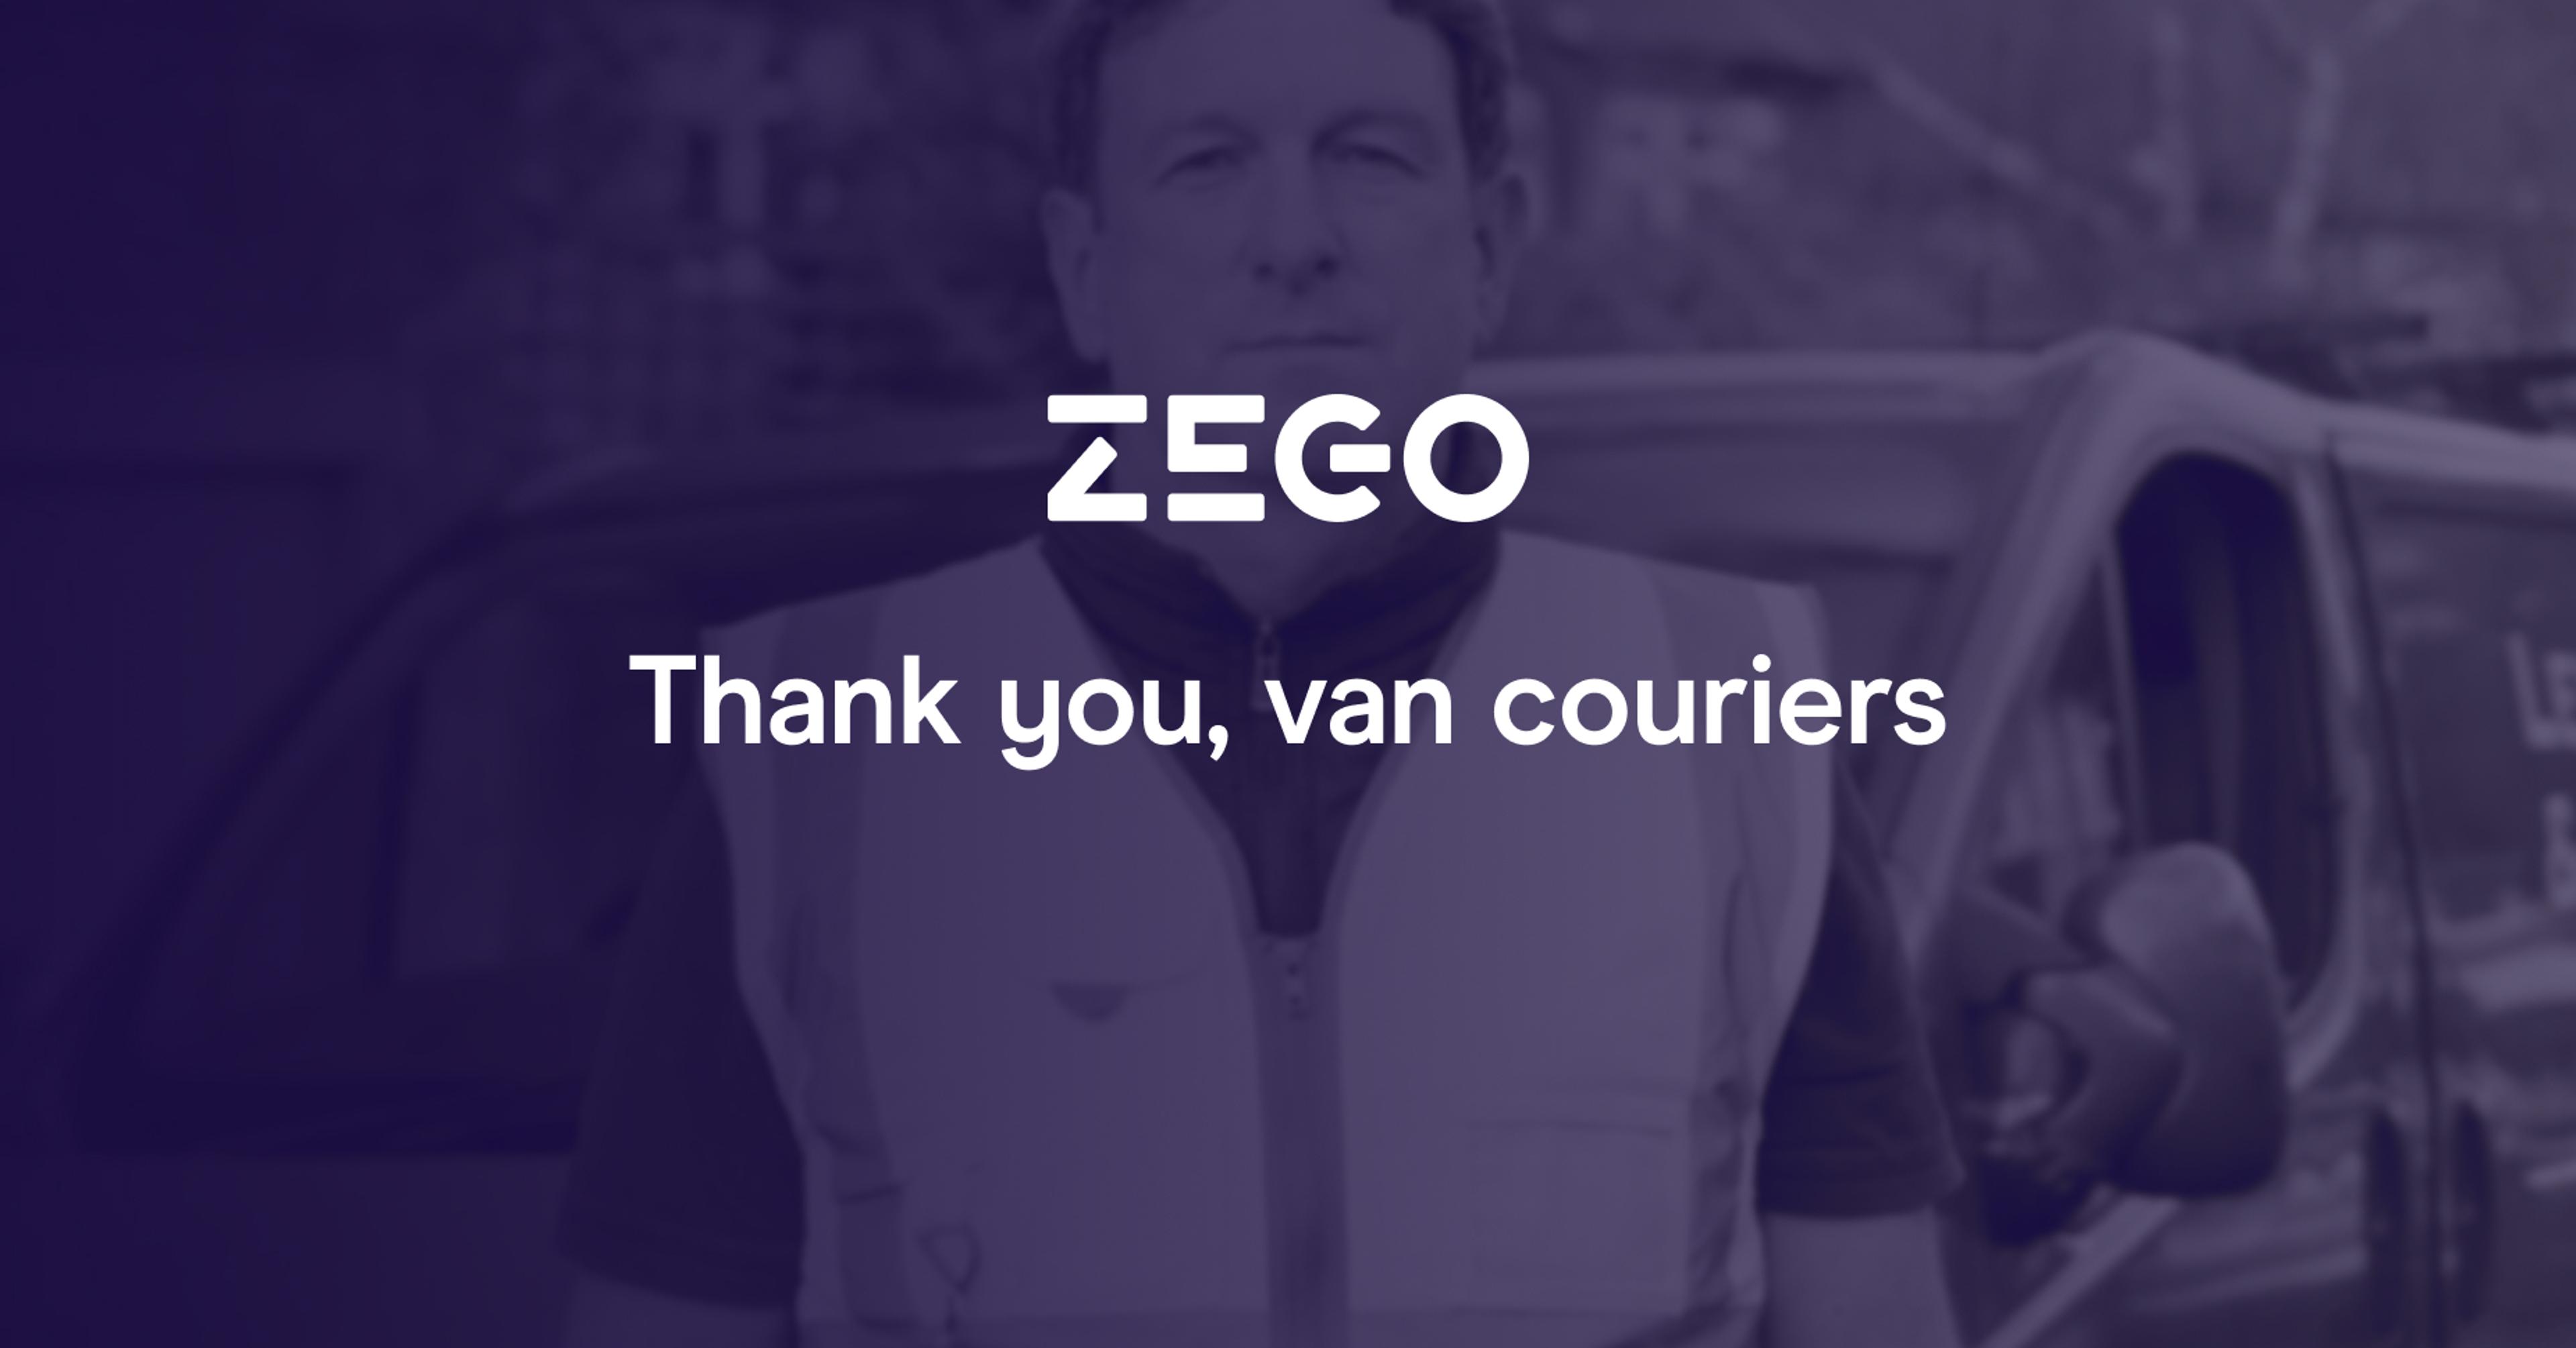 Thank you, van couriers